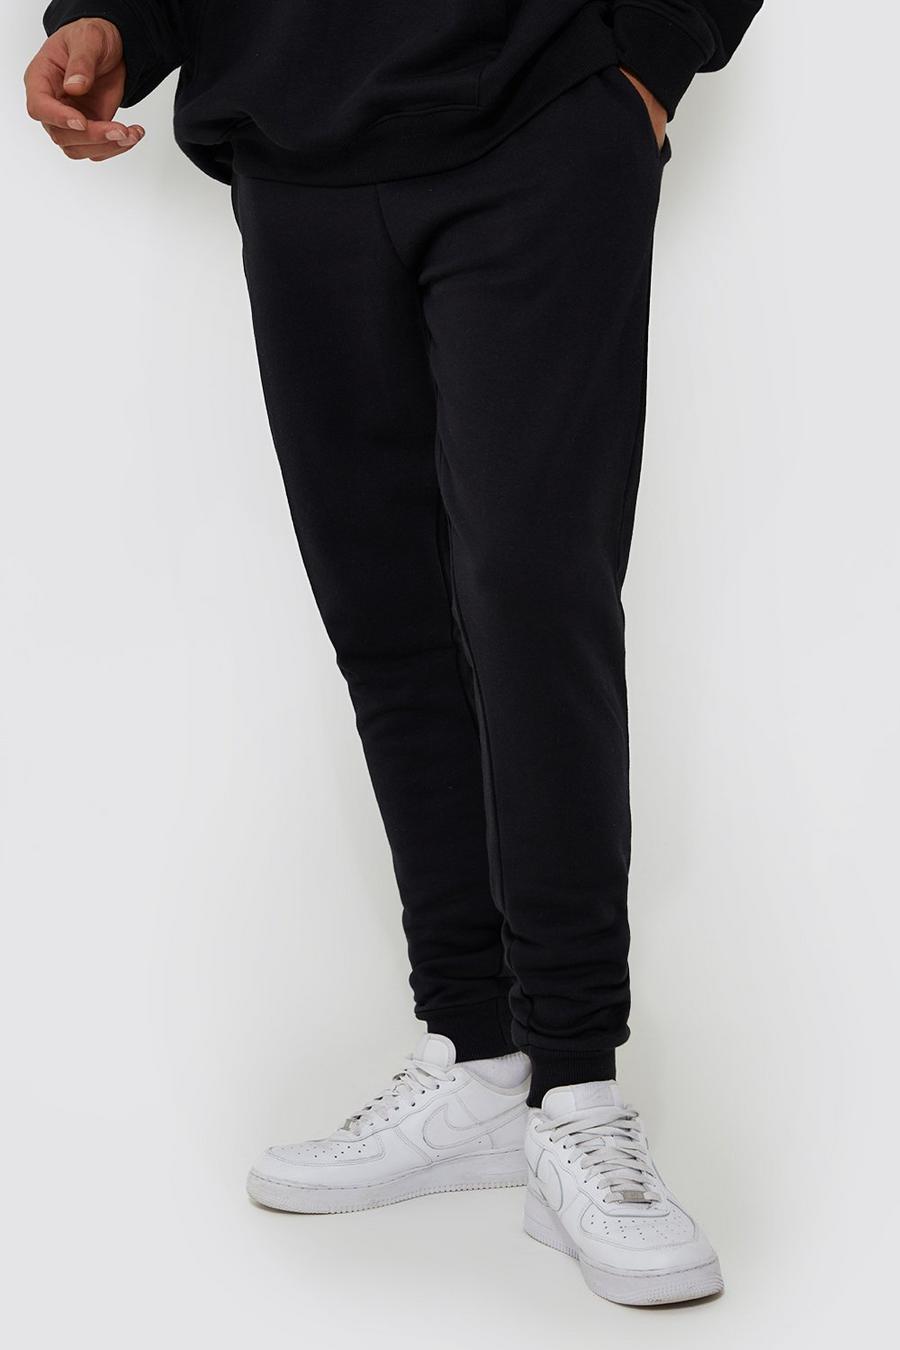 Black Tall Basic Skinny Fit Jogger with REEL Cotton